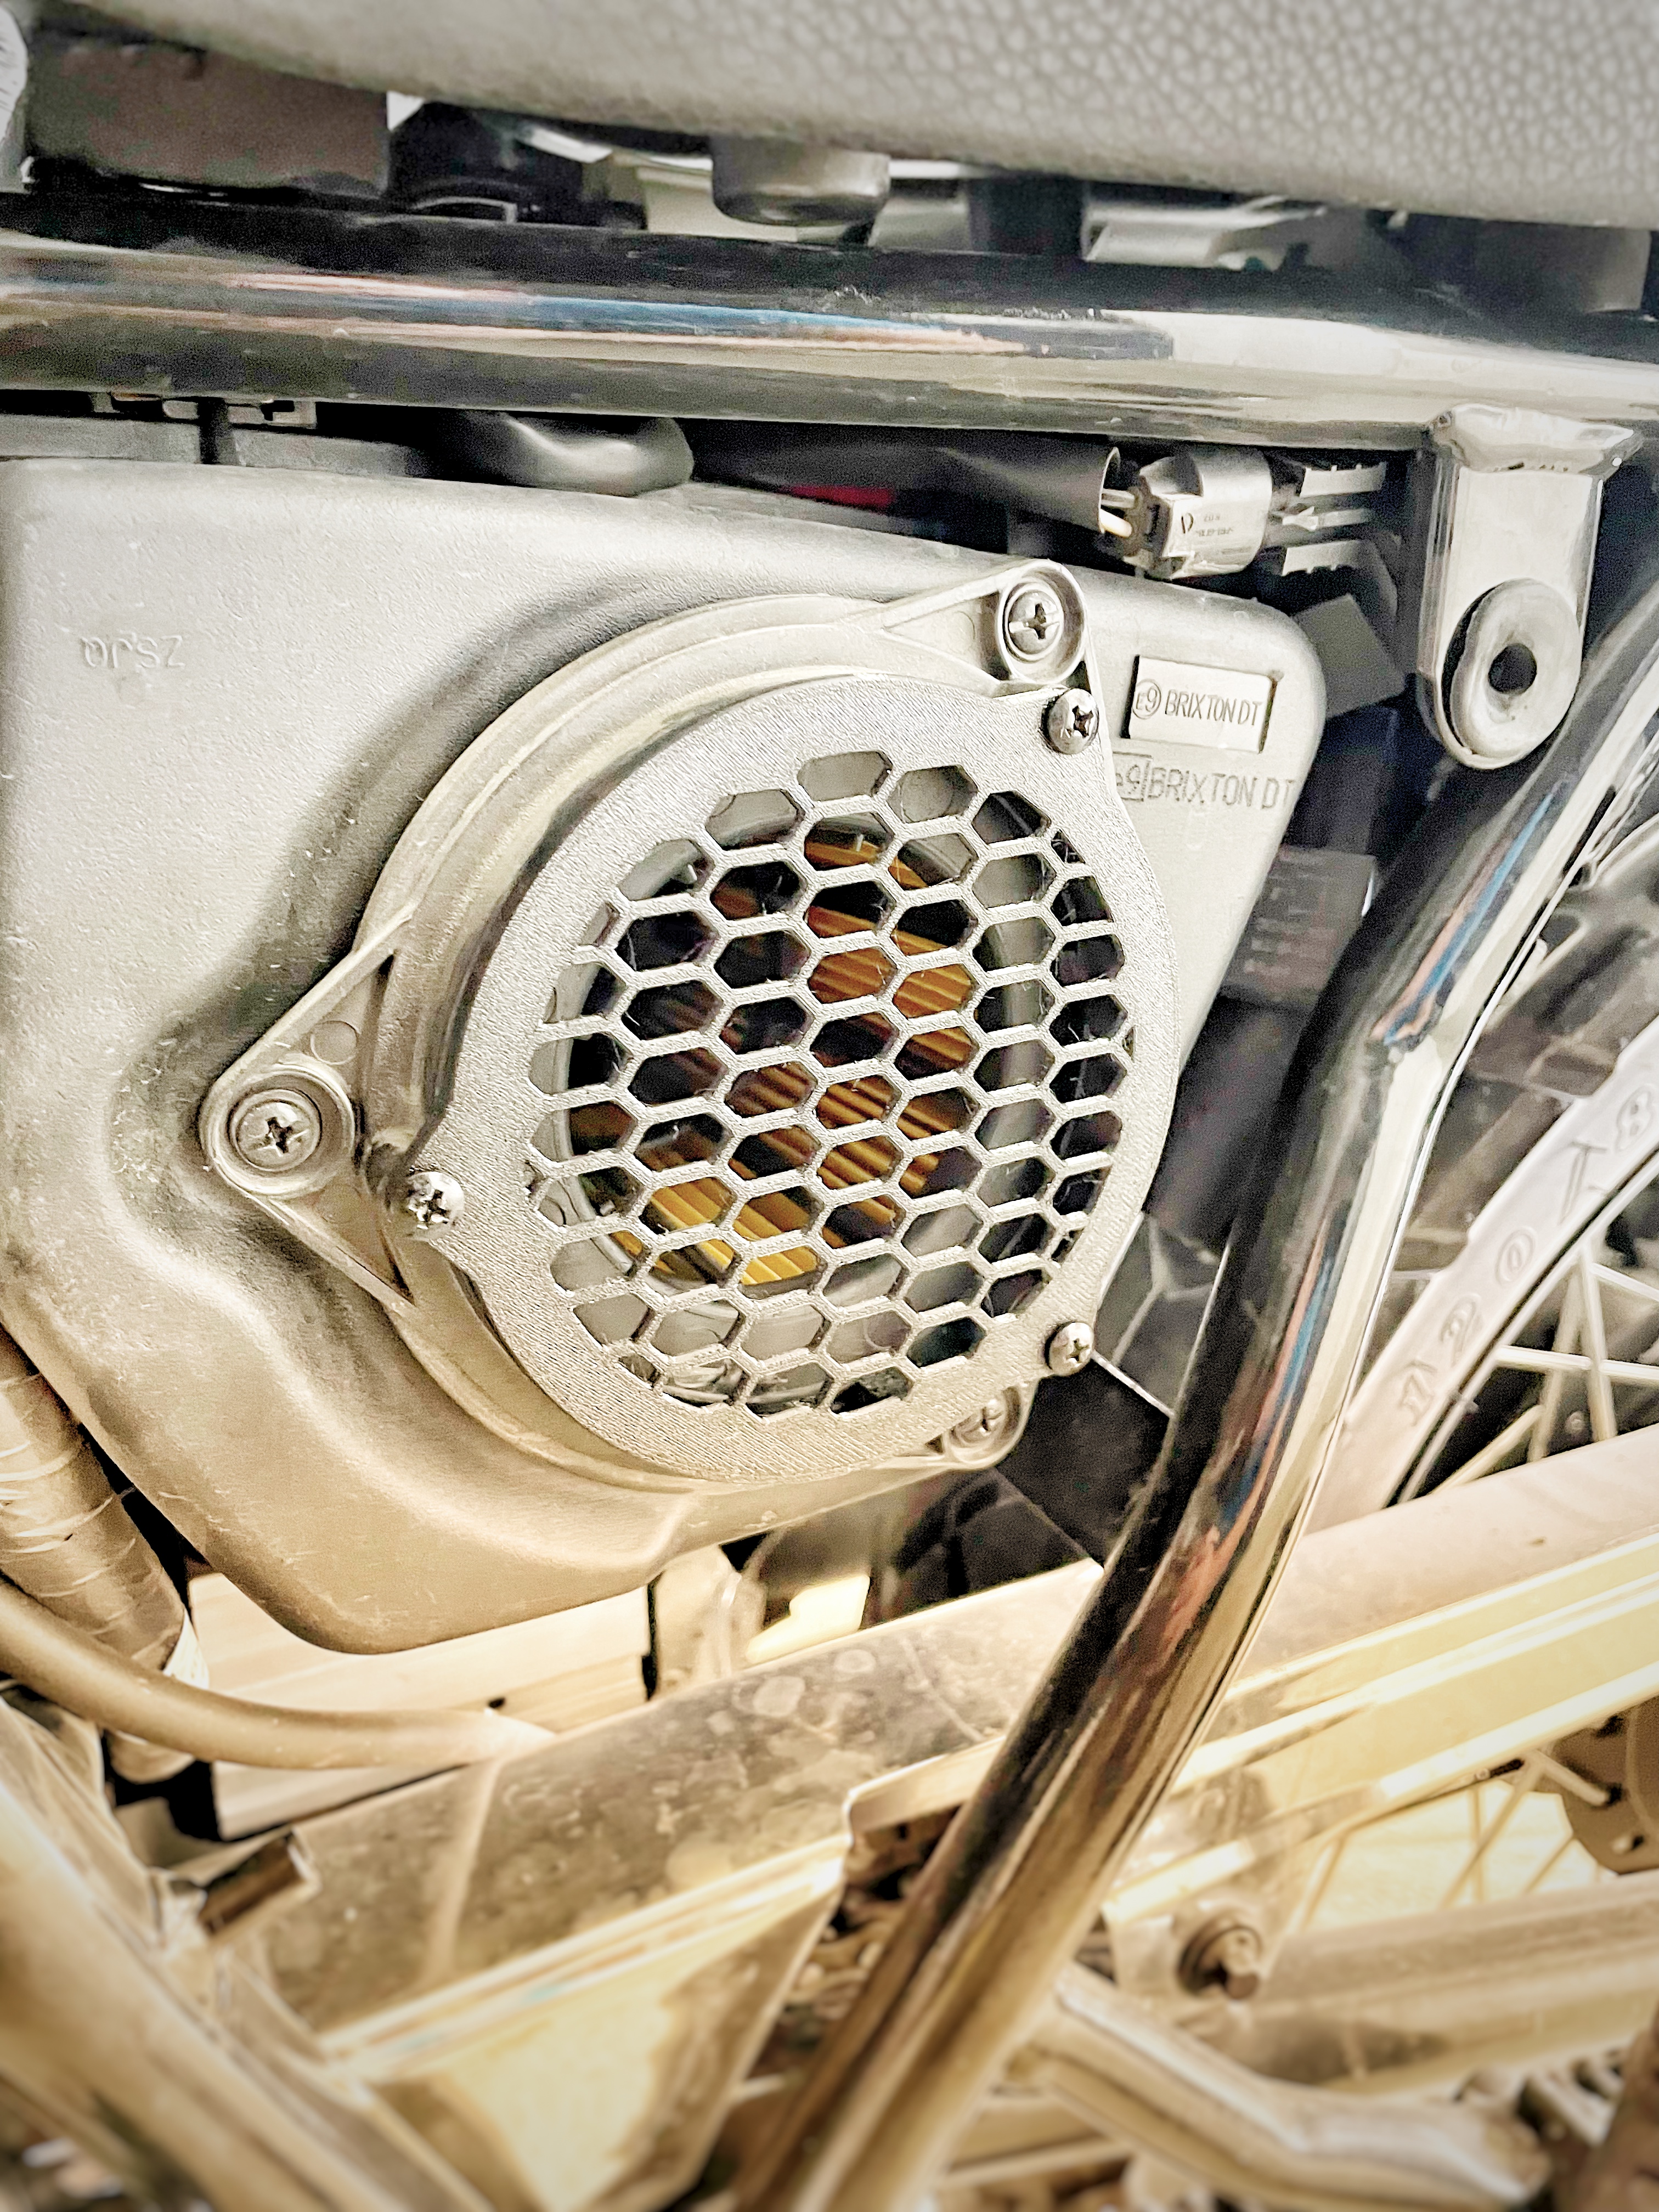 Air filter protection grille for Brixton 125ccm